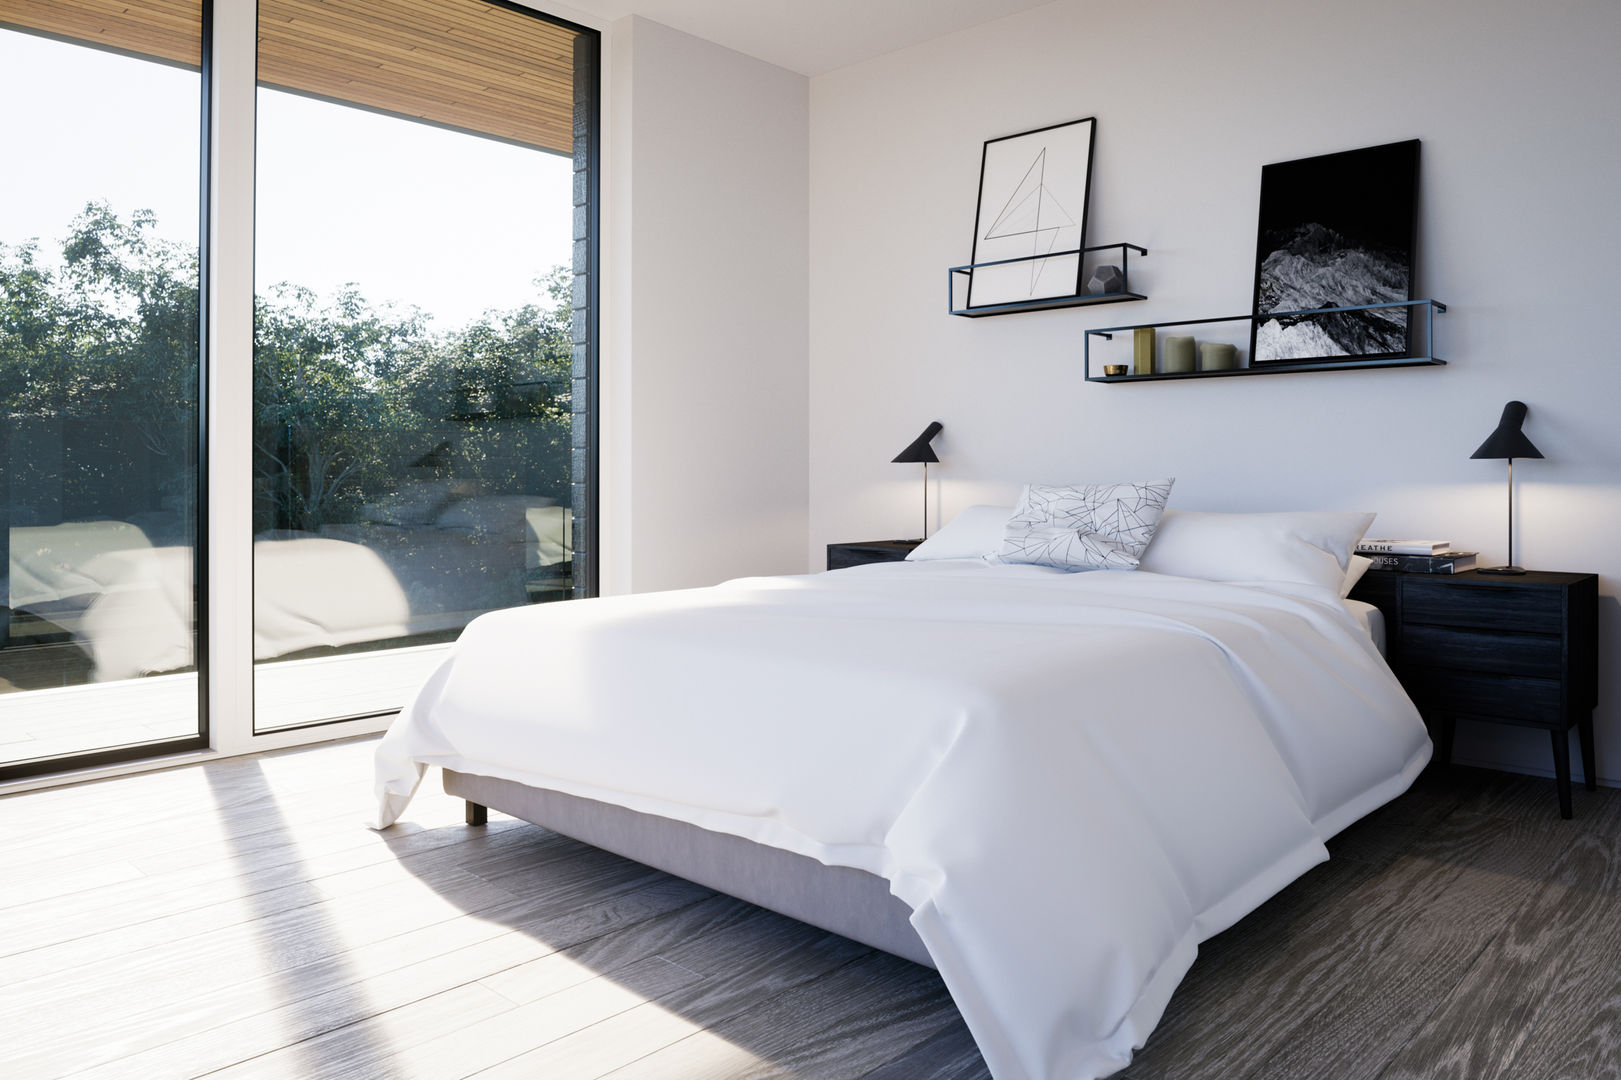 Master bedroom with glazed doors to covered deck homify Modern style bedroom ayrshire,contermporary,floating,glass,house,new house,scotland,stilts,timber,uk,walled garden